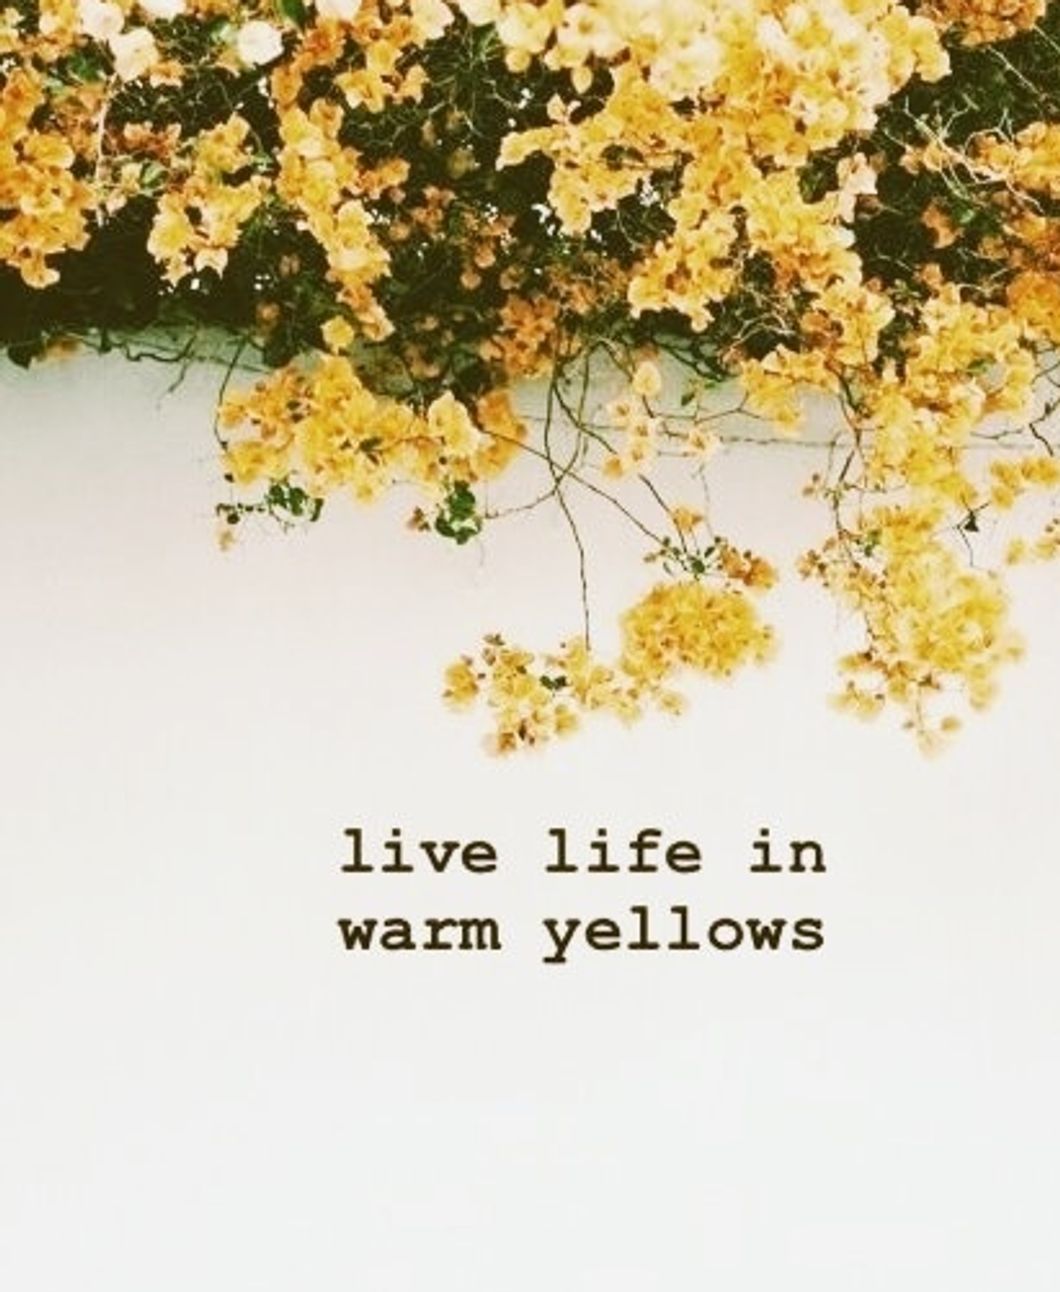 live life in warm yellows